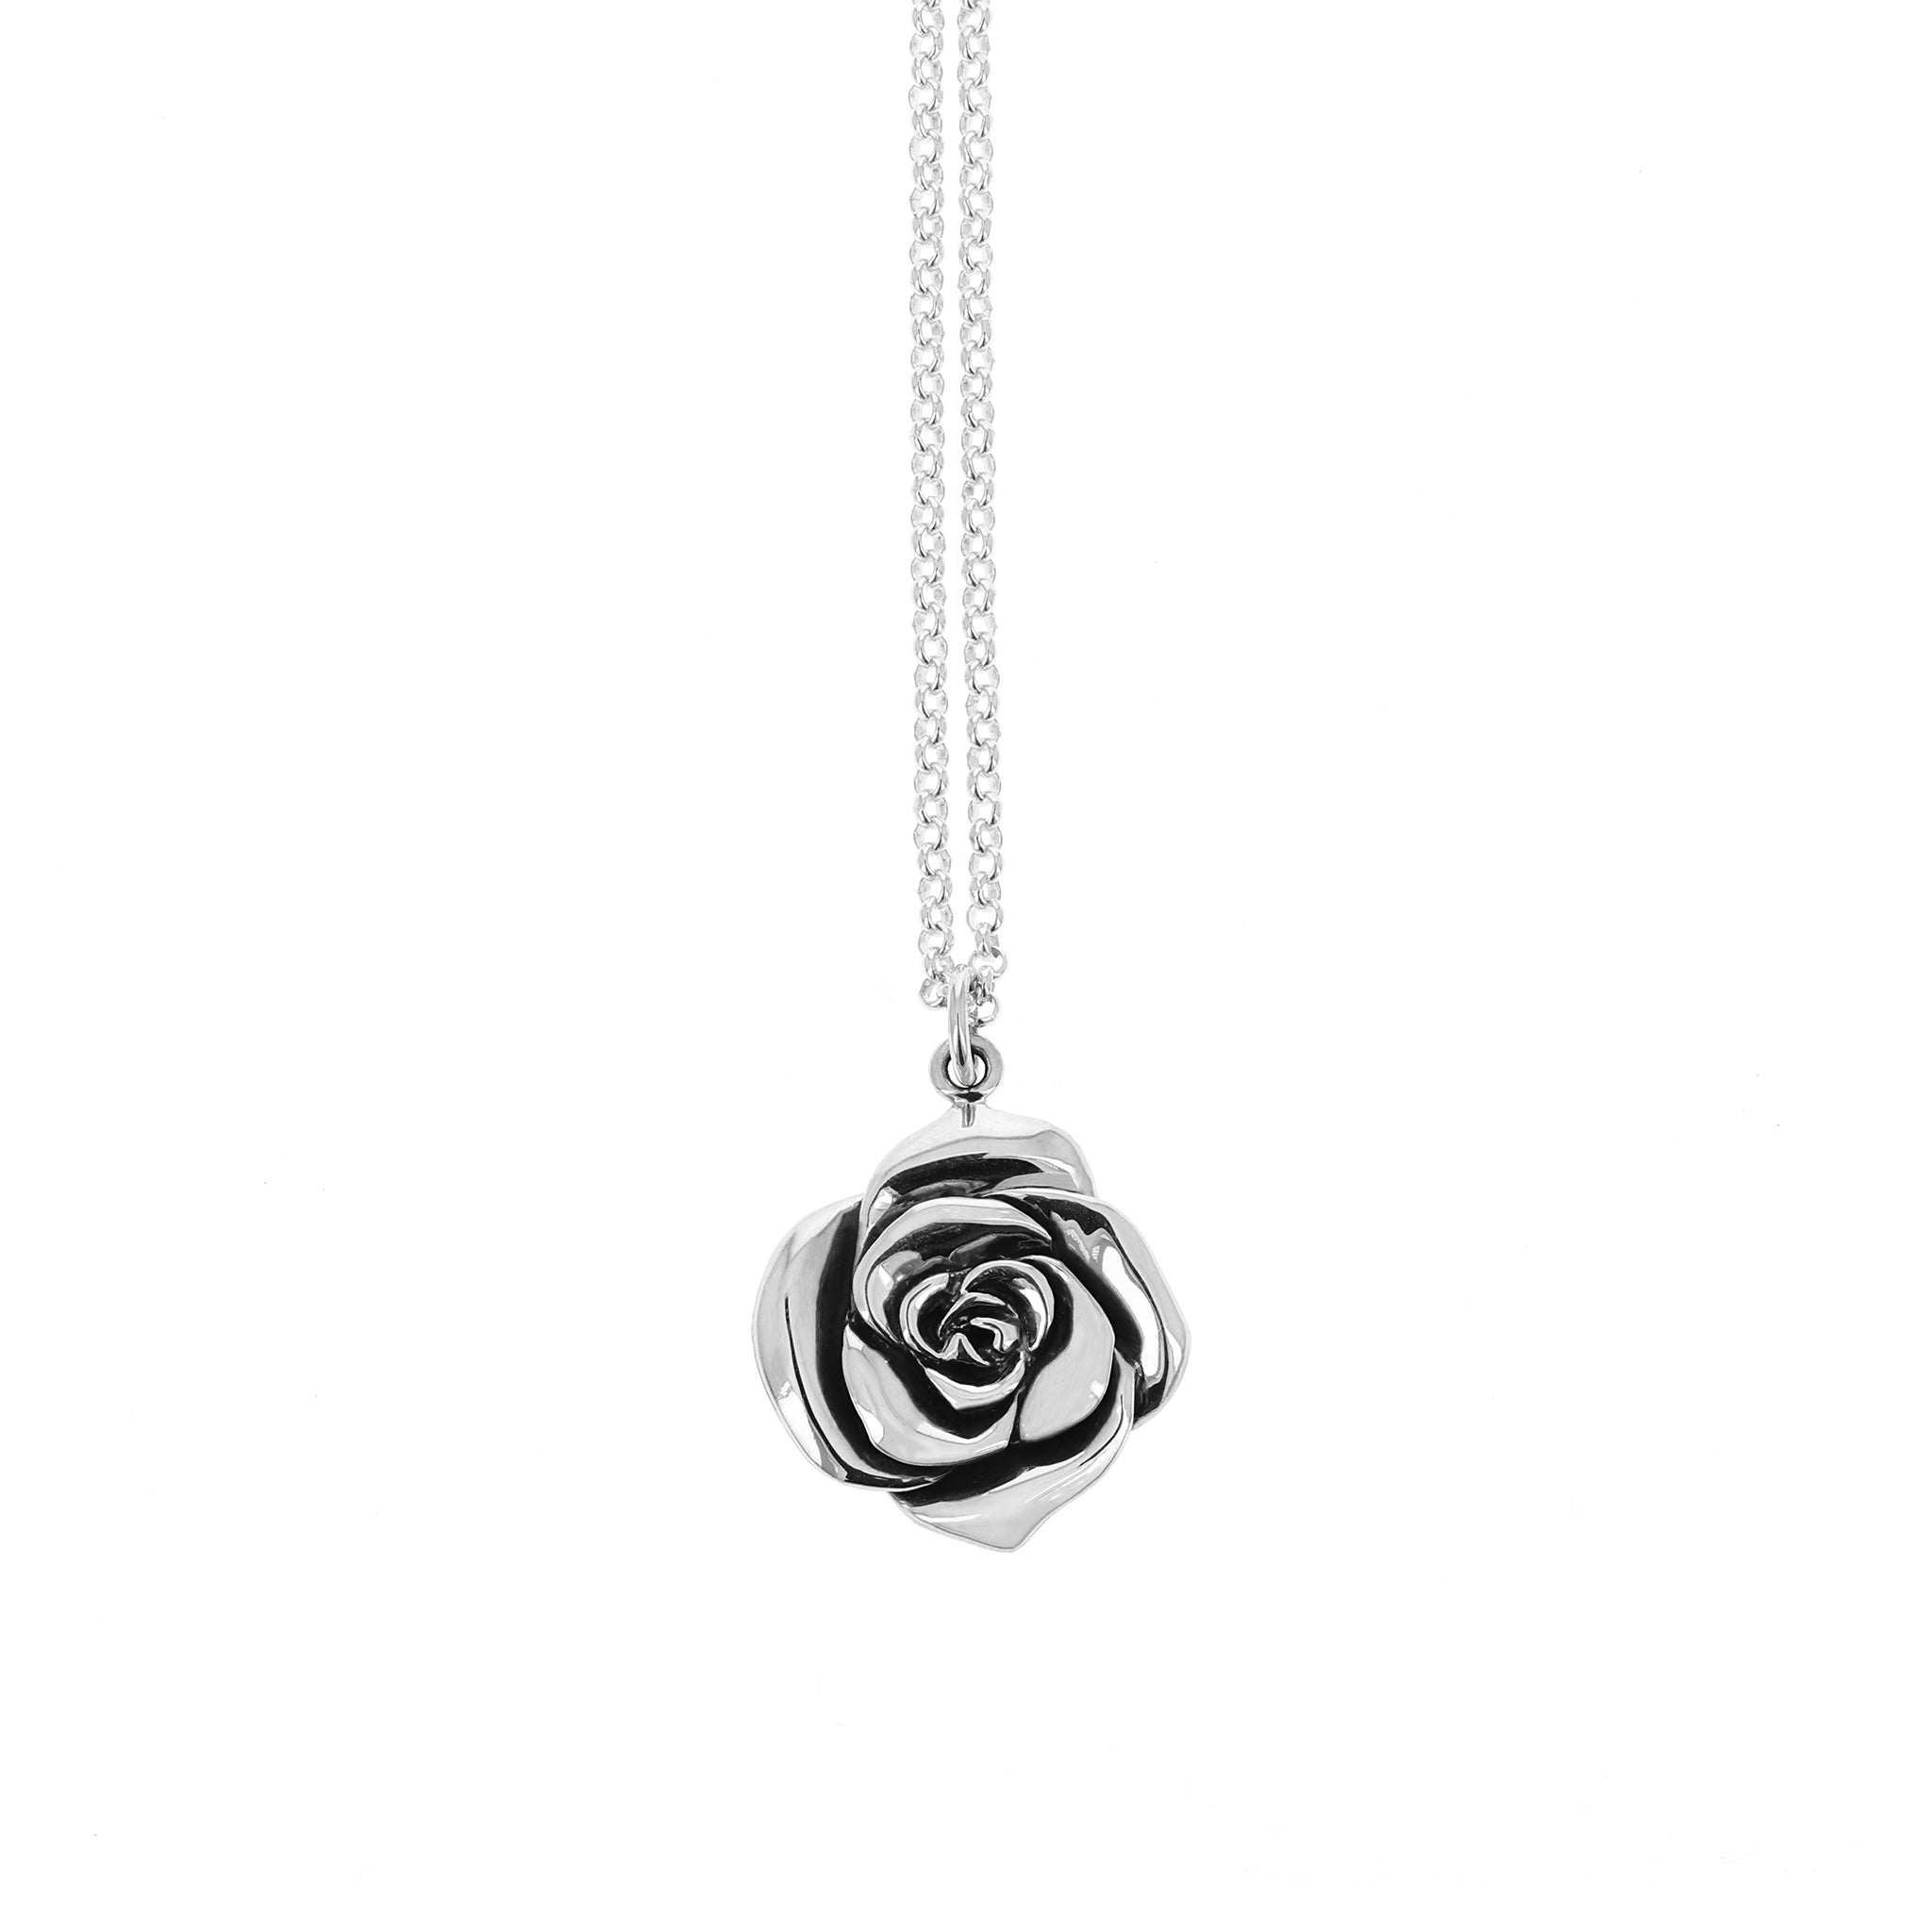 Rose Necklace Rose Charm Rose Pendant Sterling Rose Silver Rose Flower  Charm Flower Jewelry Flower Necklace Gift for Mom Silver Charm Bloom - Etsy